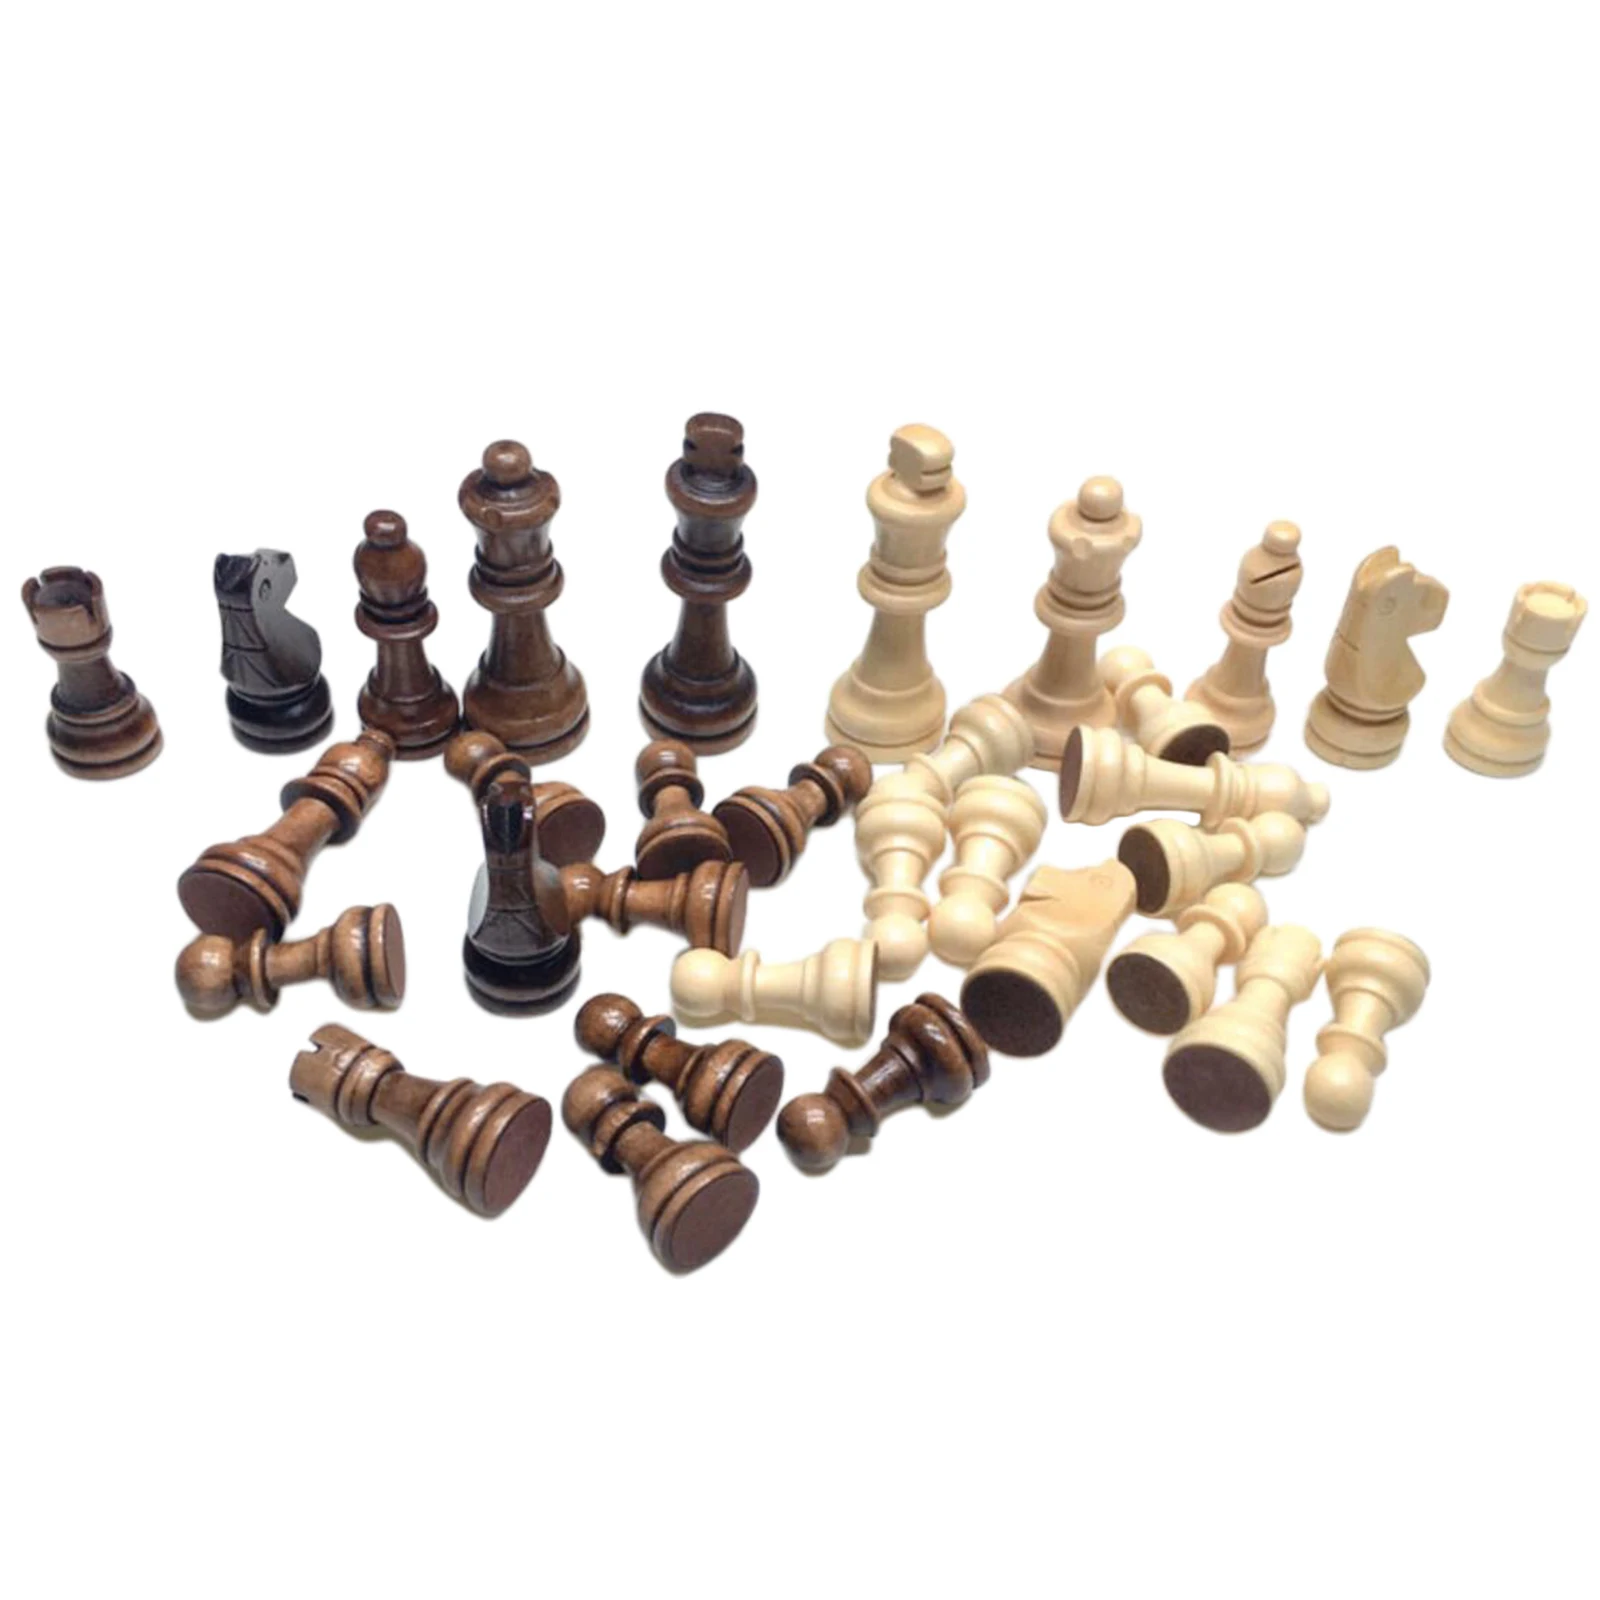 

32pcs Standard Chess Pieces Entertainment Tournament Chessmen Replacement Chess Game 4inch King Pawns Figurine Board Game